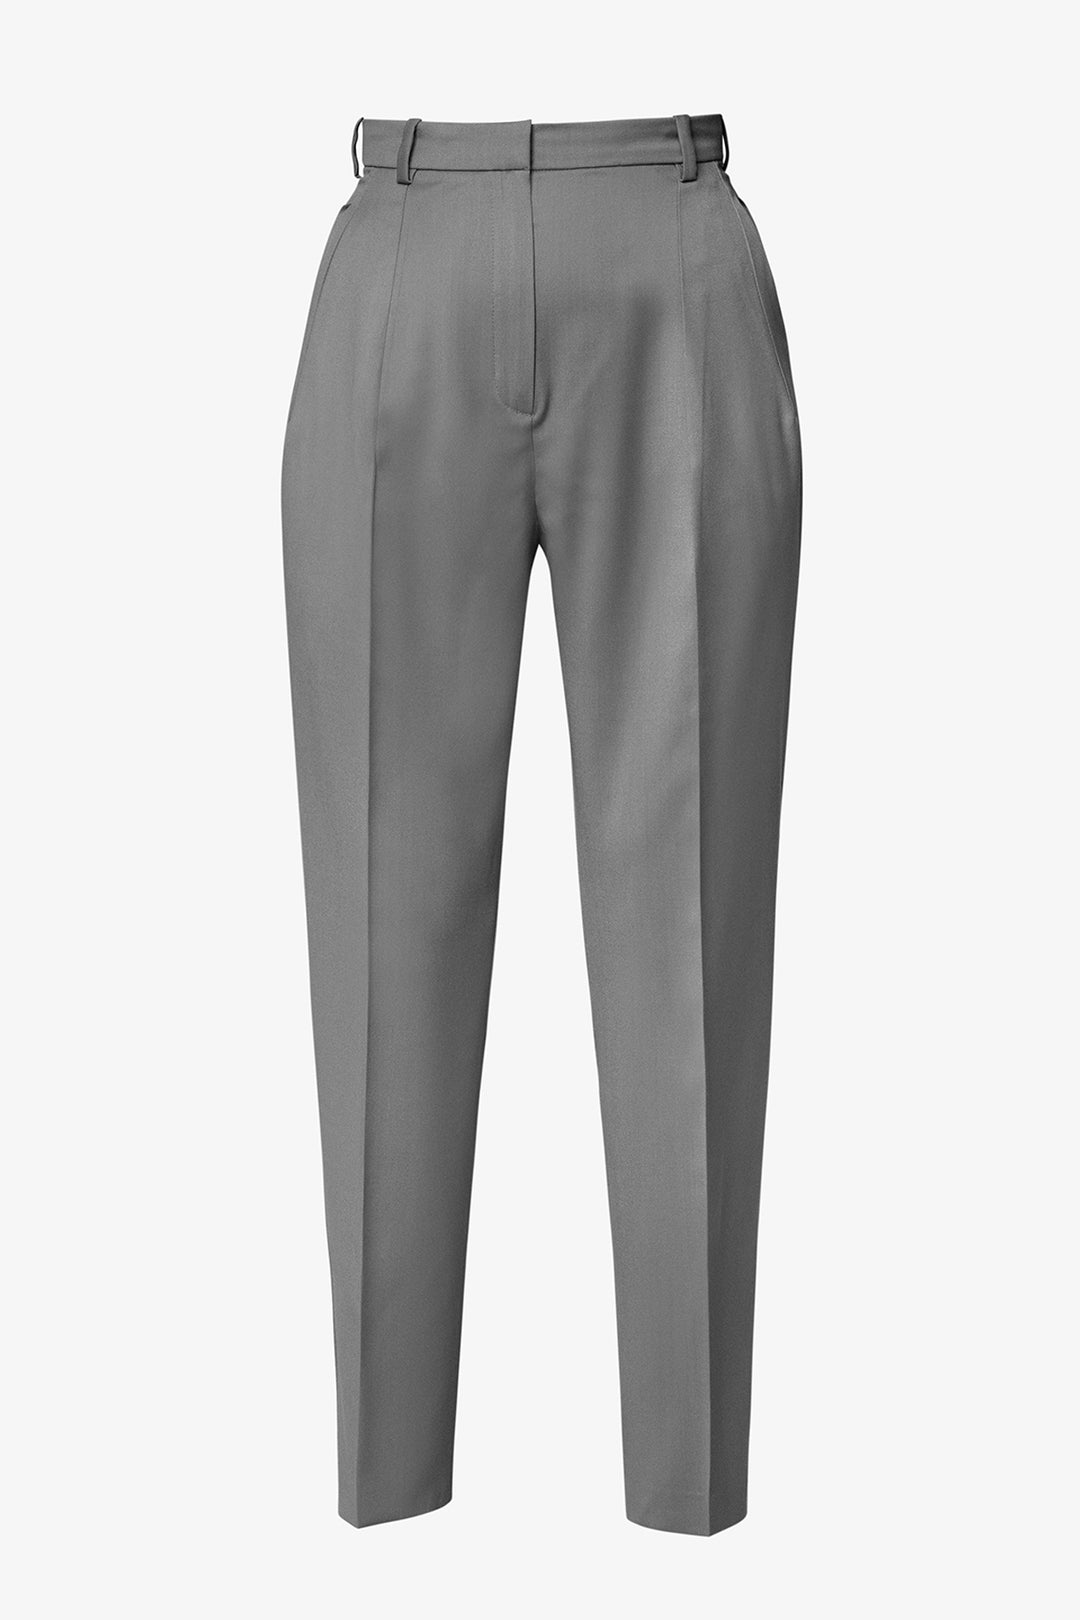 Anthracite Classic Conic Pants